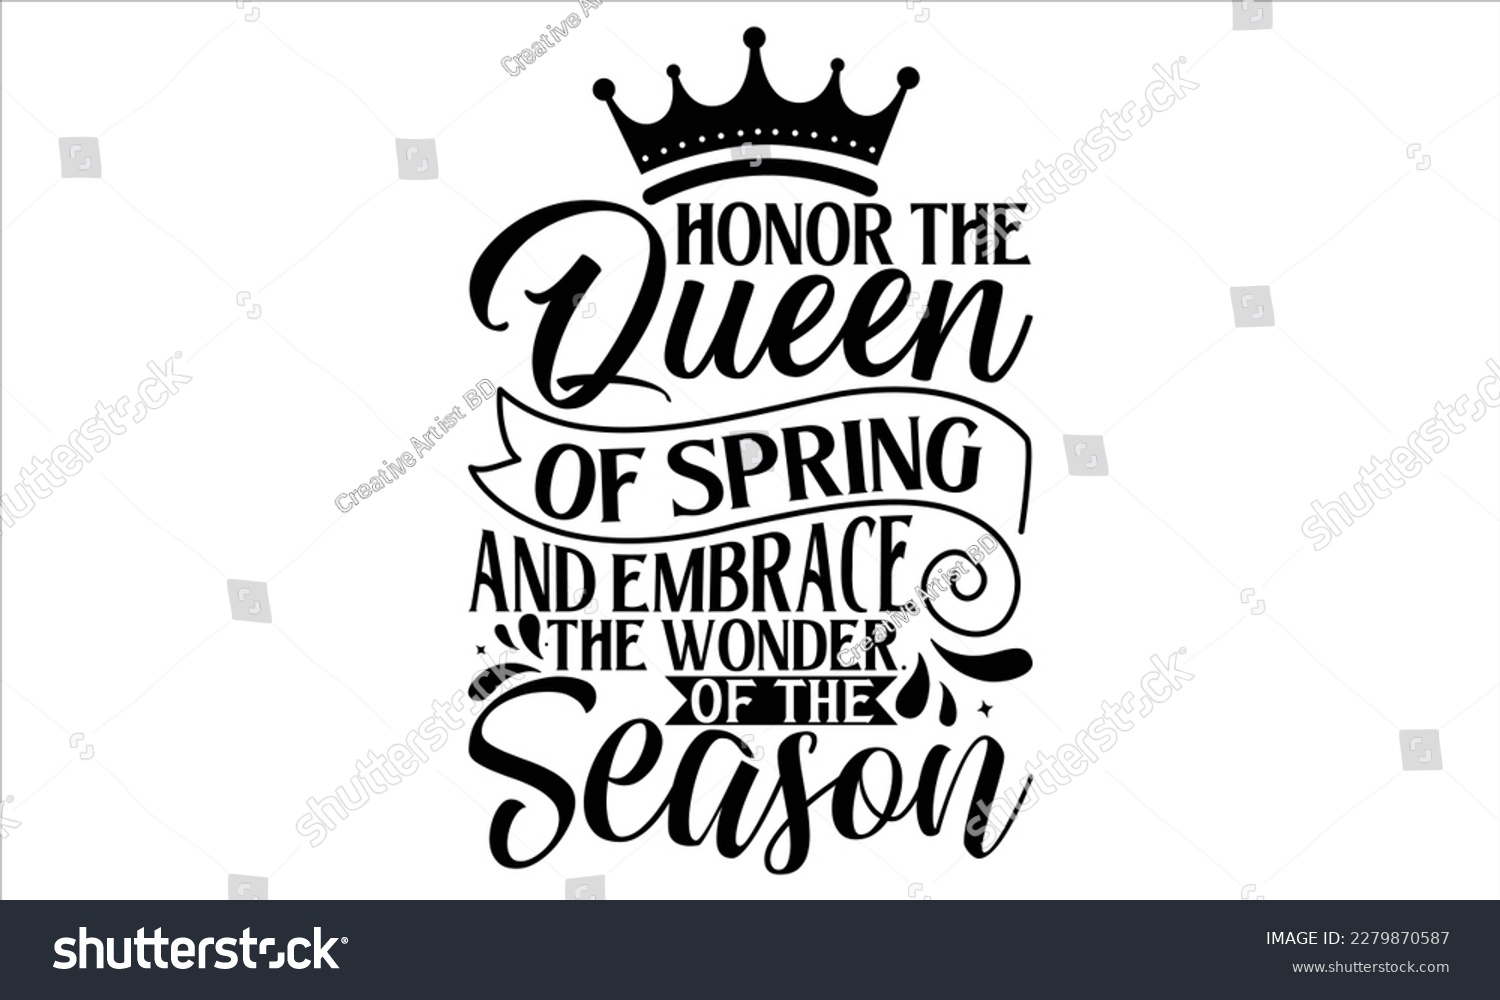 SVG of Honor The Queen Of Spring And Embrace The Wonder Of The Season - Victoria Day T Shirt Design, Vintage style, used for poster svg cut file, svg file, poster, banner, flyer and mug. svg